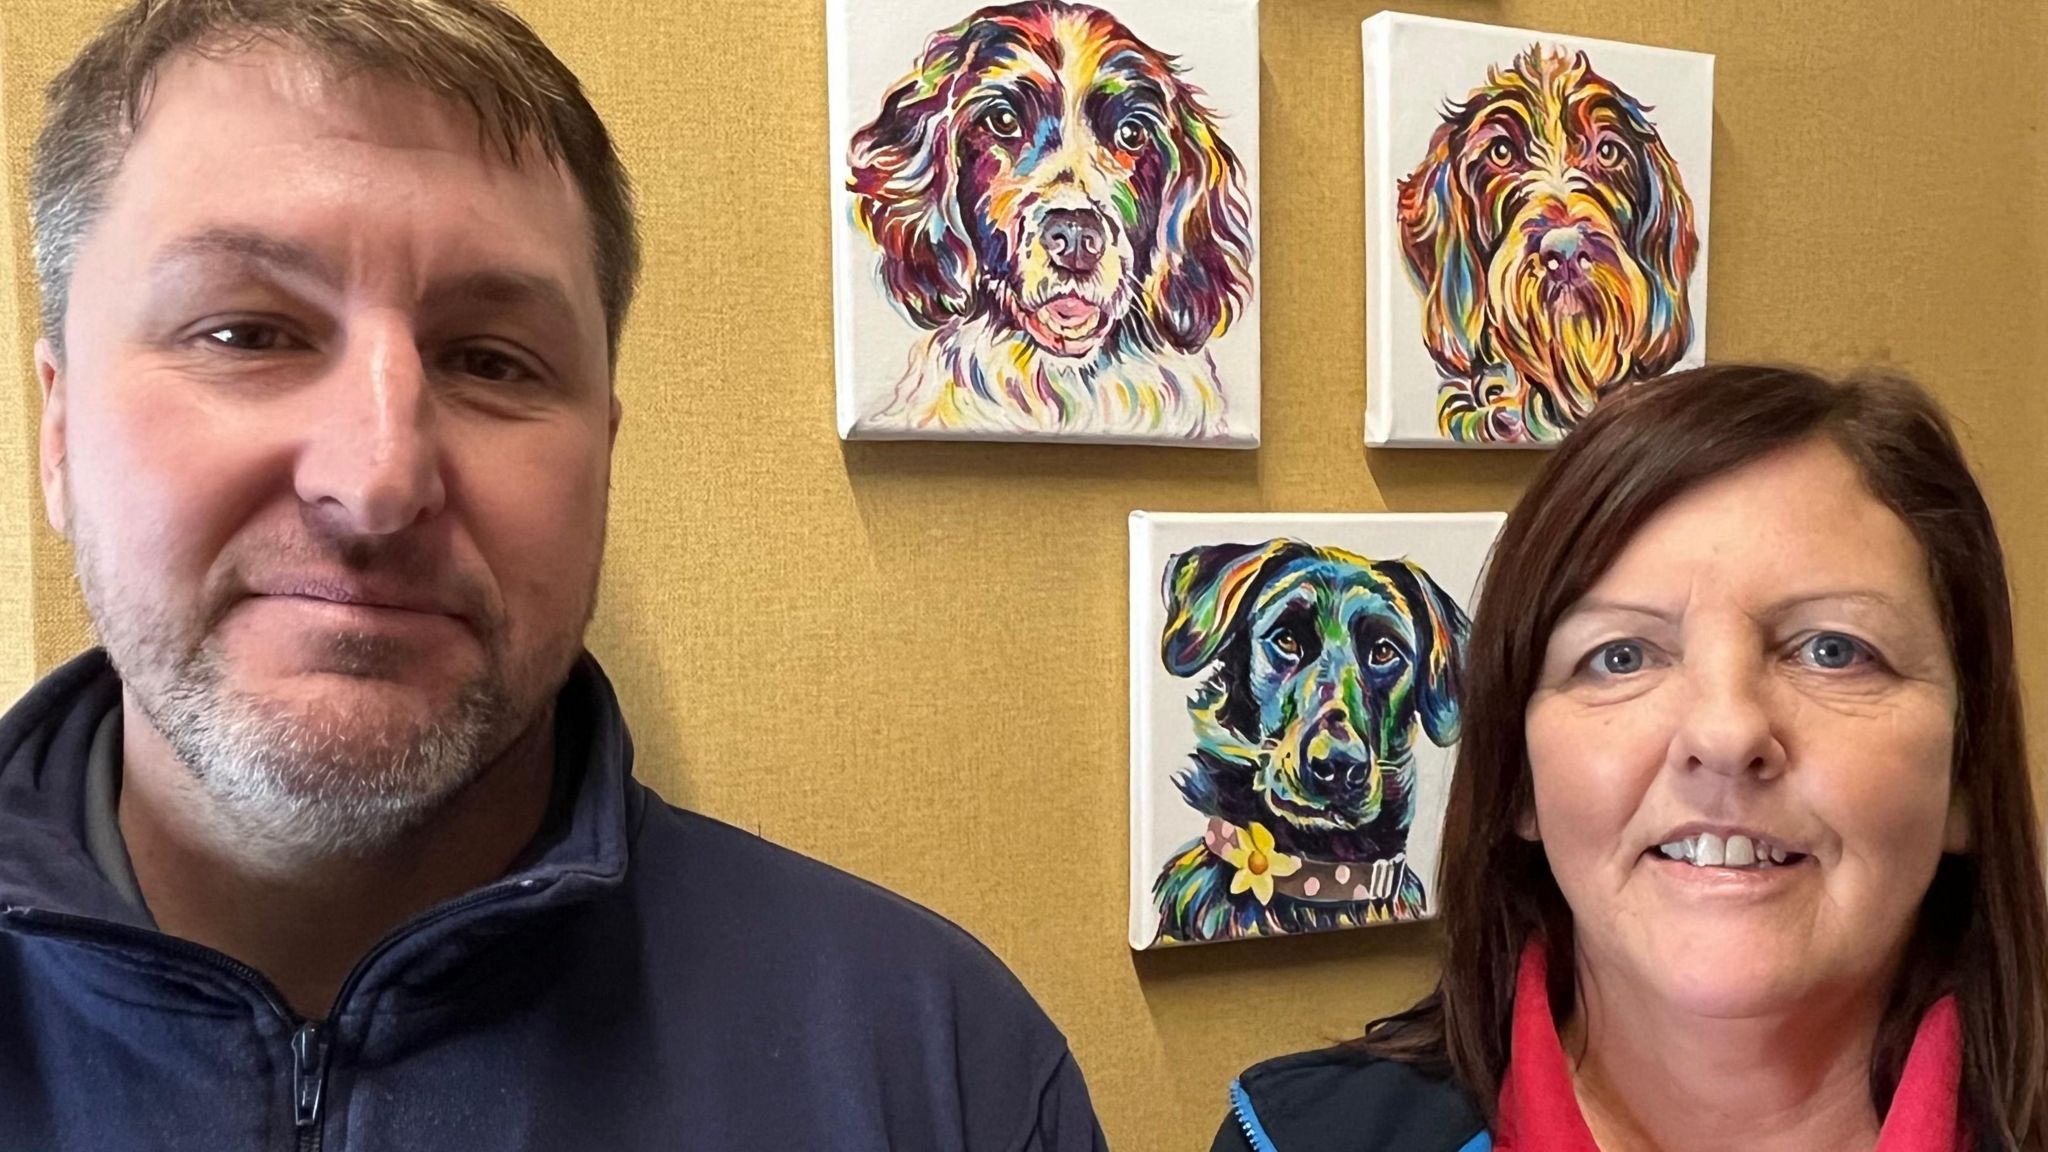 Darren Bates and Wendy Stone with dog portraits behind them